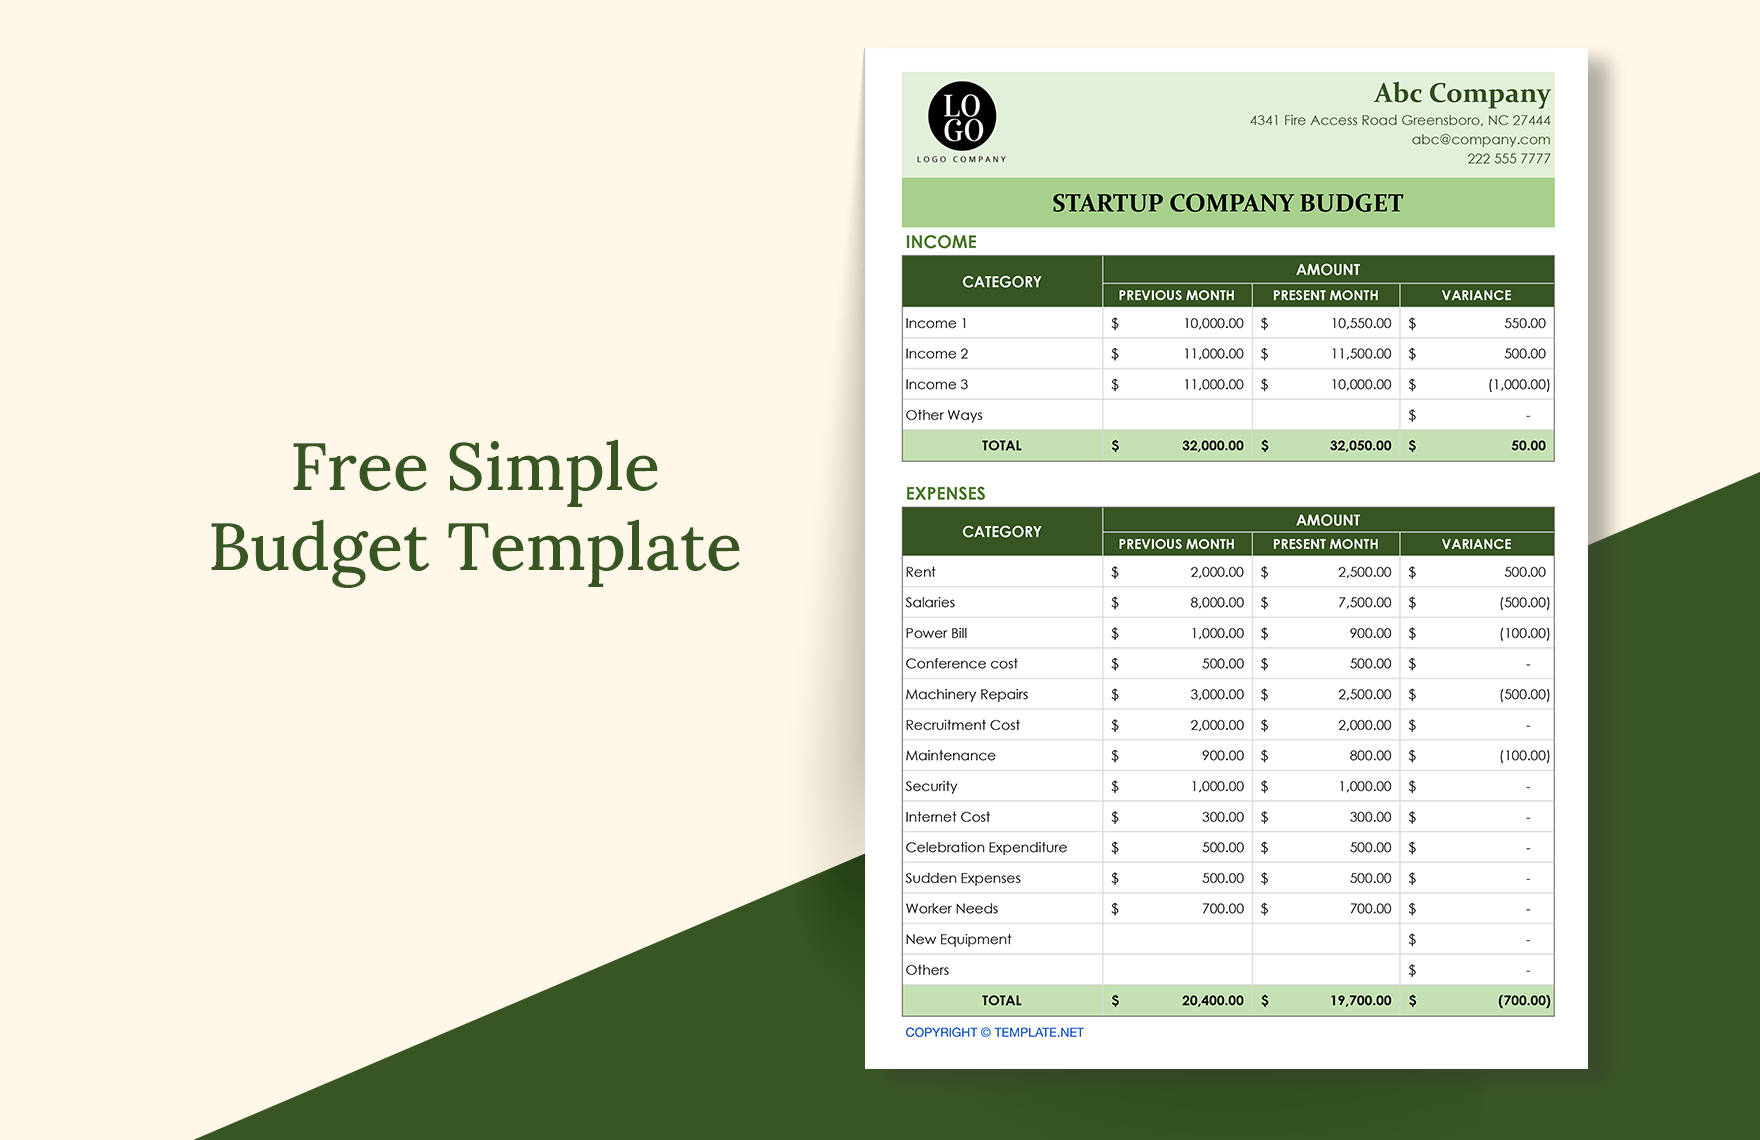 Free Simple Budget Template in Word, Google Docs, Excel, PDF, Google Sheets, Apple Pages, Apple Numbers